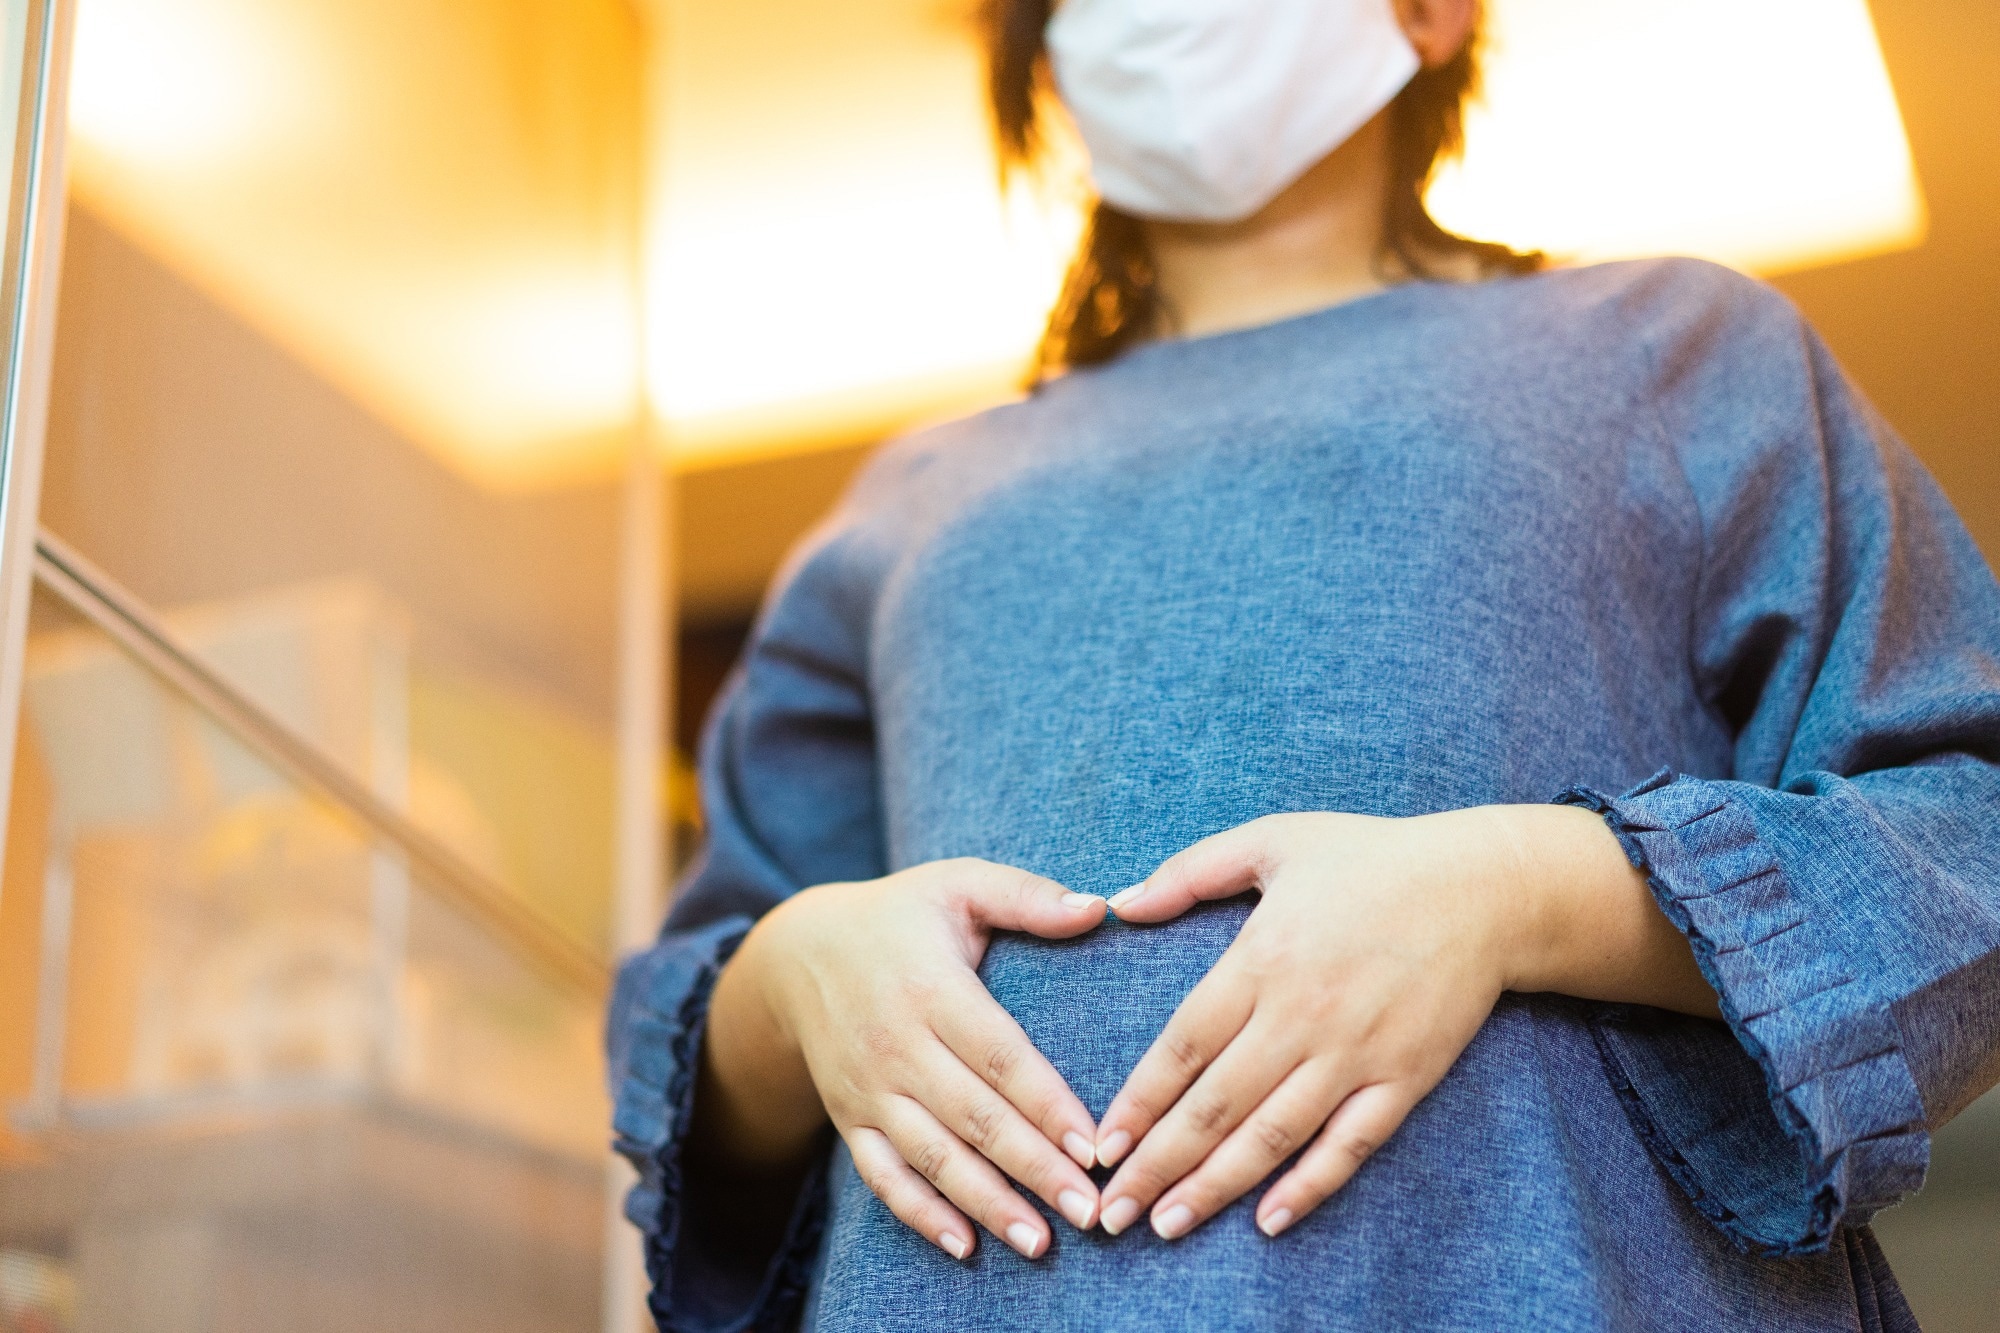 Study: Single-cell RNA sequencing reveals immunological rewiring at the maternal-fetal interface following asymptomatic/mild SARS-CoV-2 infection. Image Credit: MIA Studio / Shutterstock